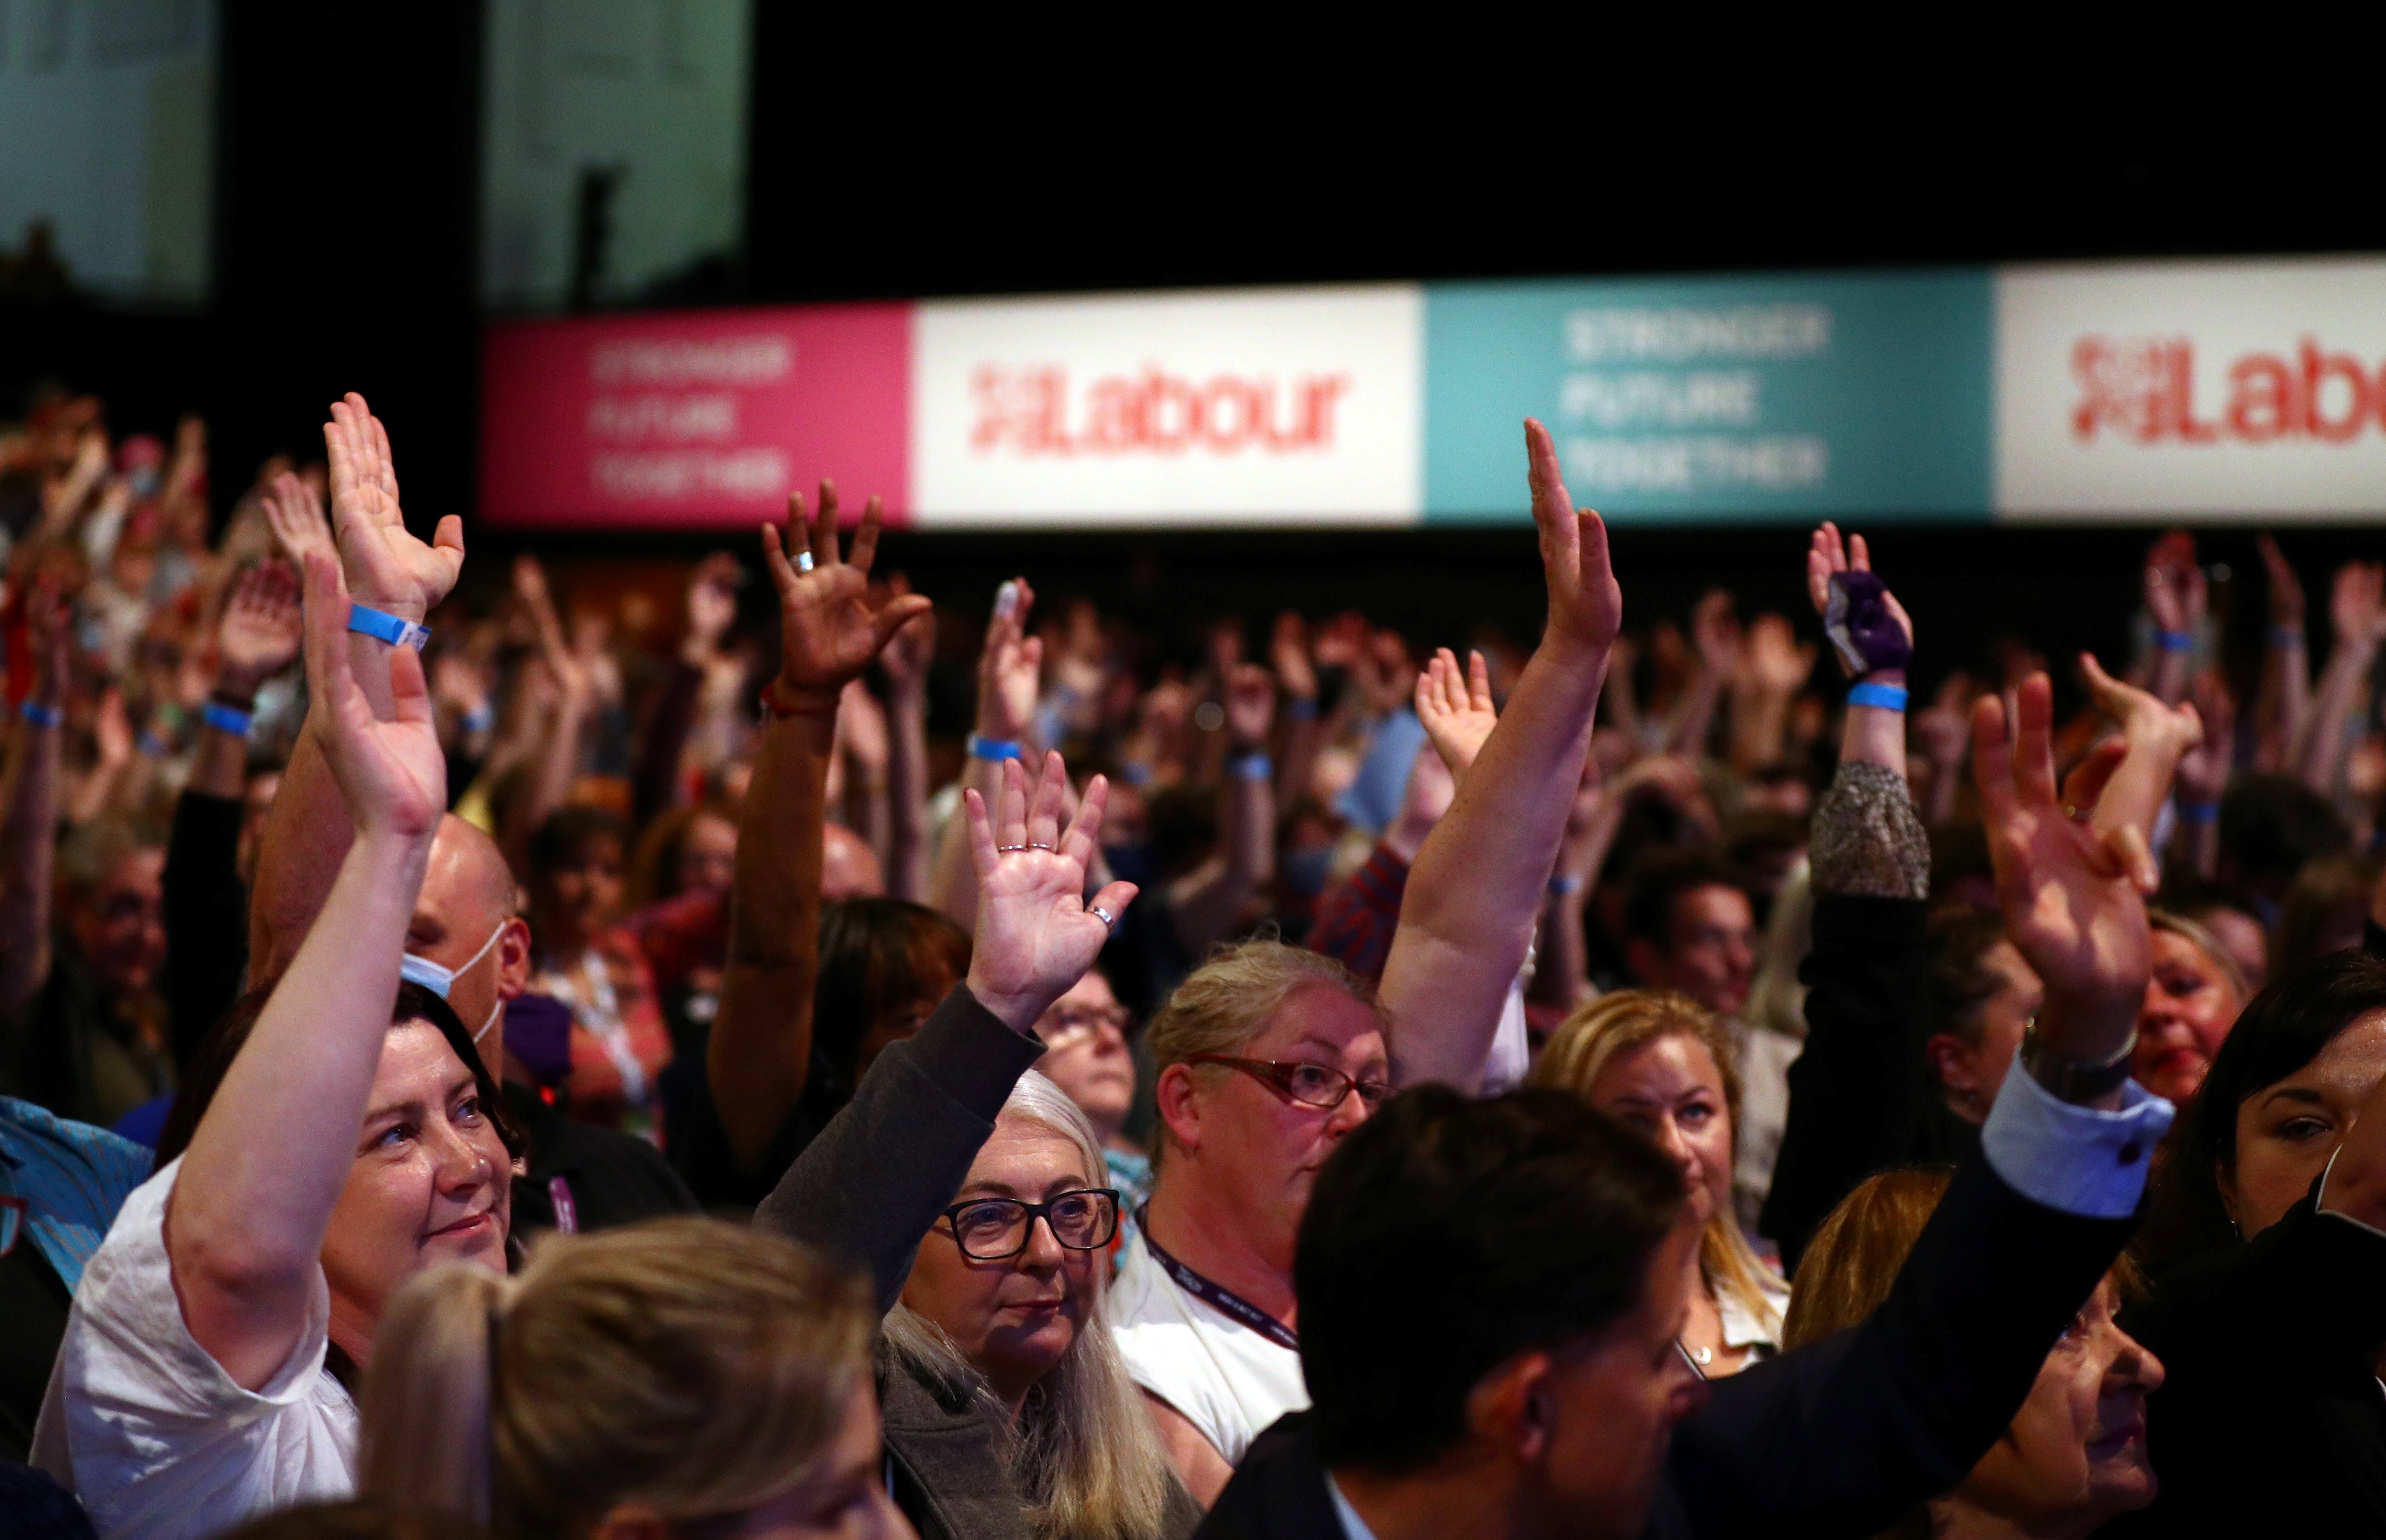 A vote taking place at Labour’s conference